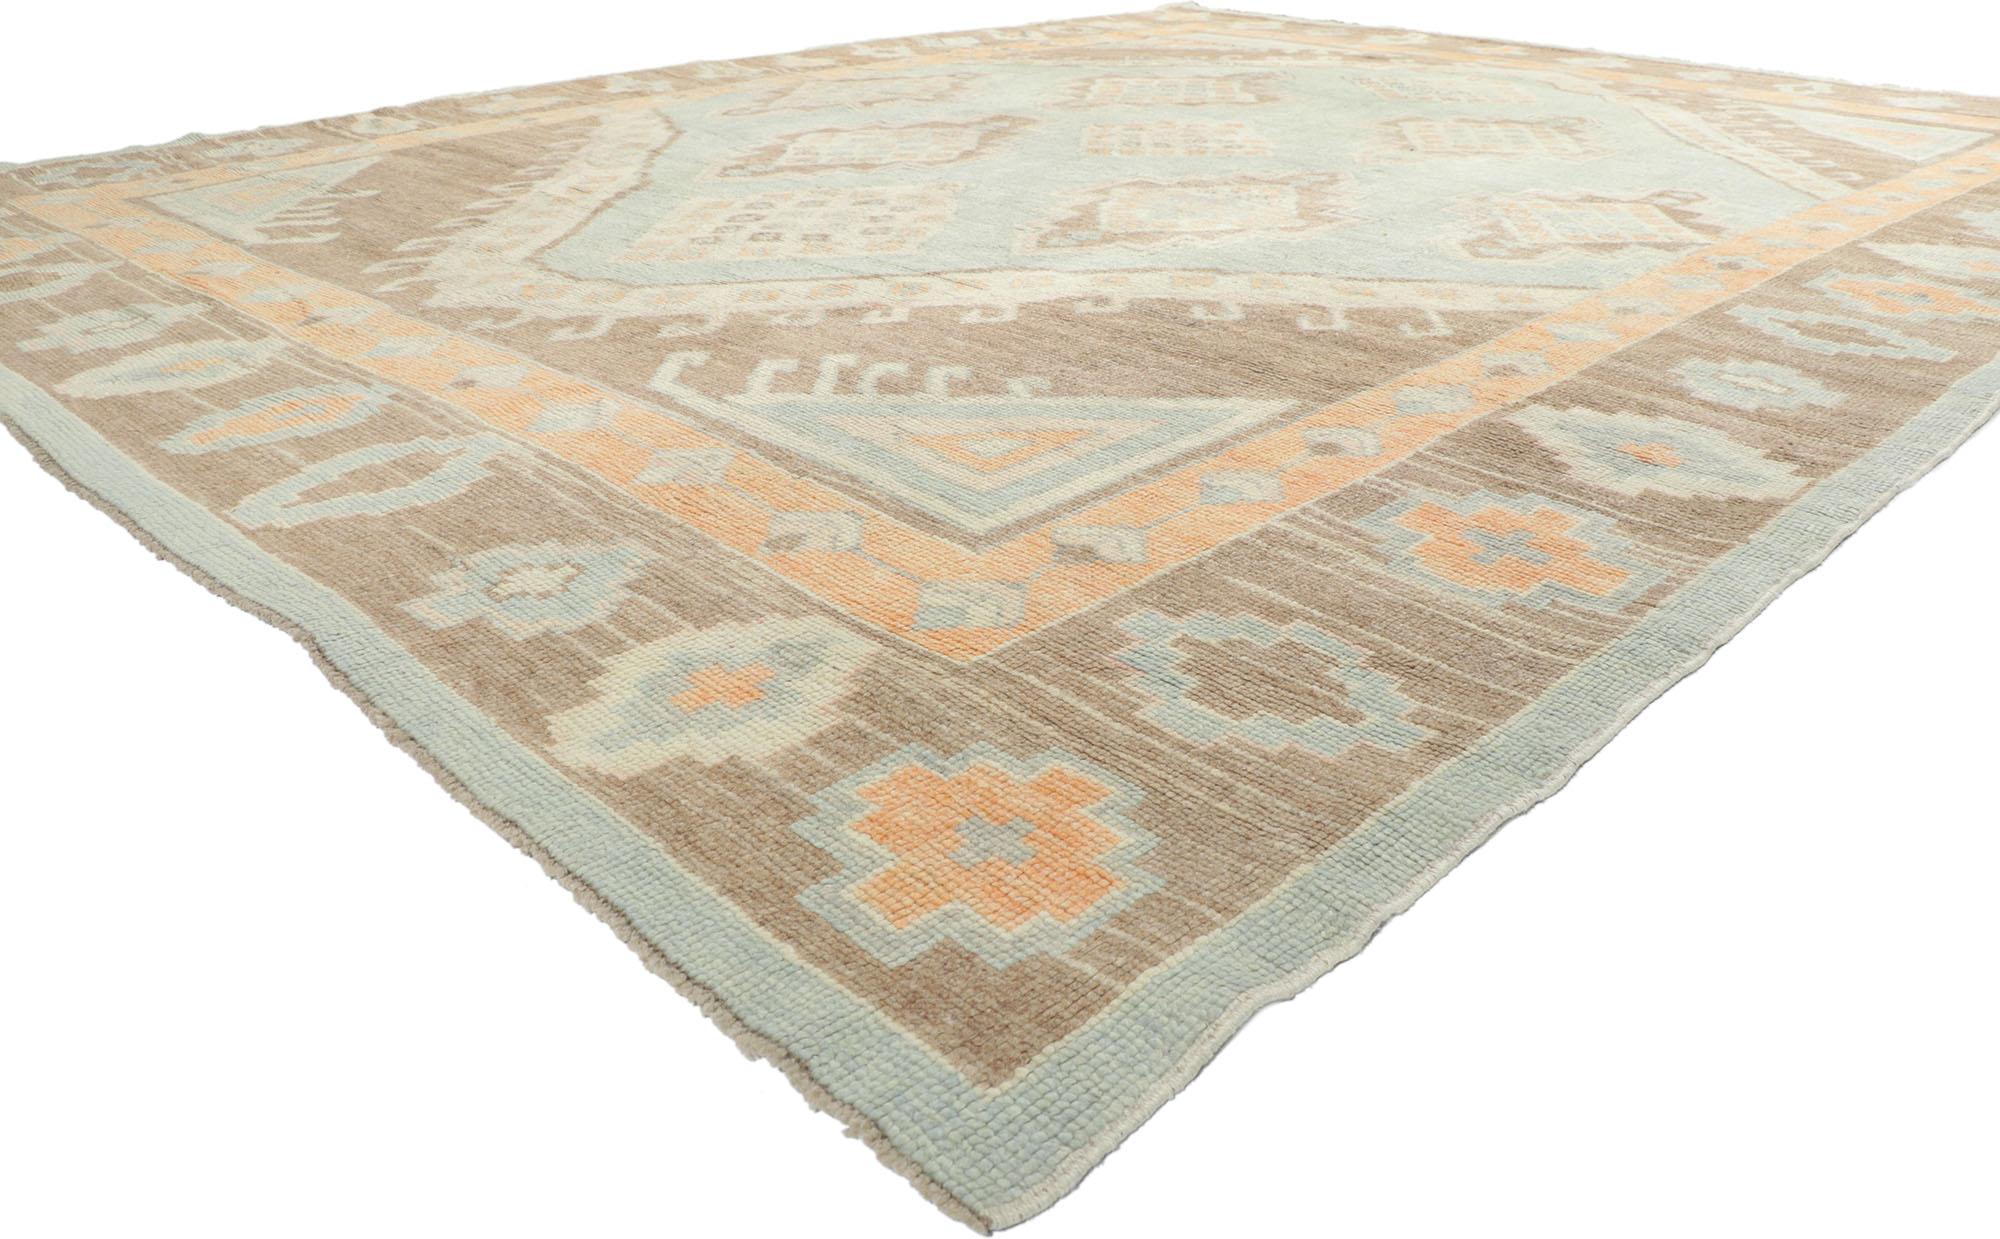 53603 new contemporary Turkish Oushak rug with Tribal style 10'07 x 13'02. With its expressive tribal design, incredible detail and texture, this hand-knotted wool contemporary Turkish Oushak rug is a captivating vision of woven beauty. The abrashed